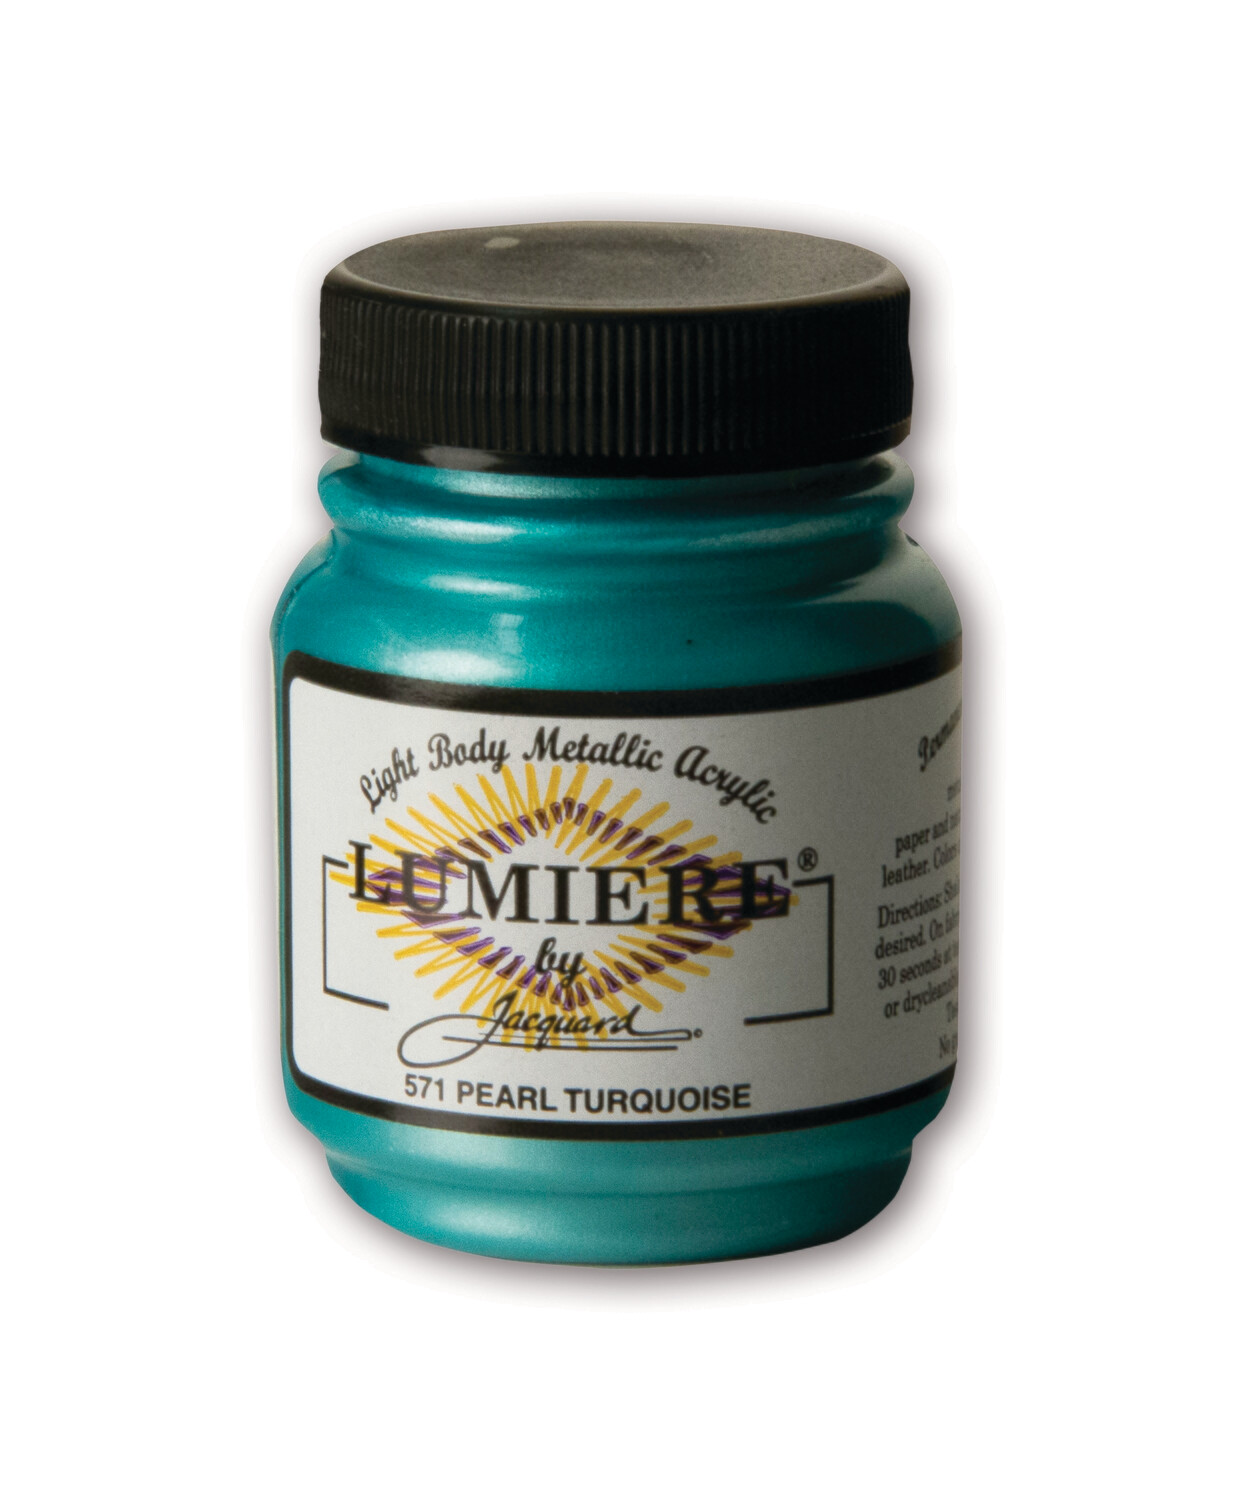 Jacquard Lumiere Paint - Pearlescent turquoise